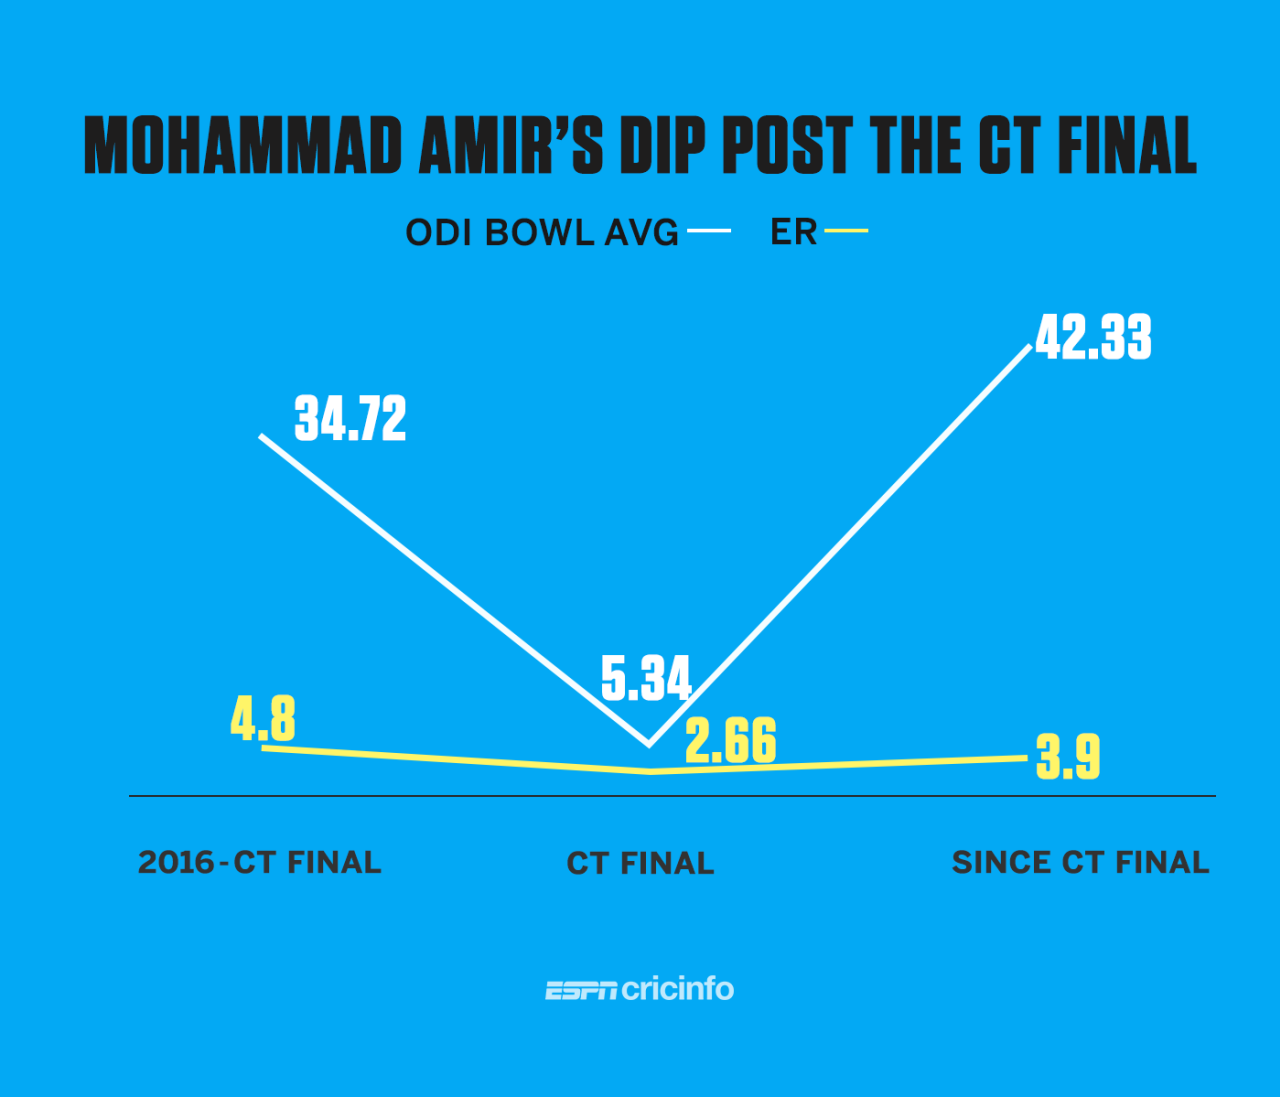 Mohammad Amir has averaged more than 40 with the ball since the Champions Trophy 2017 final 